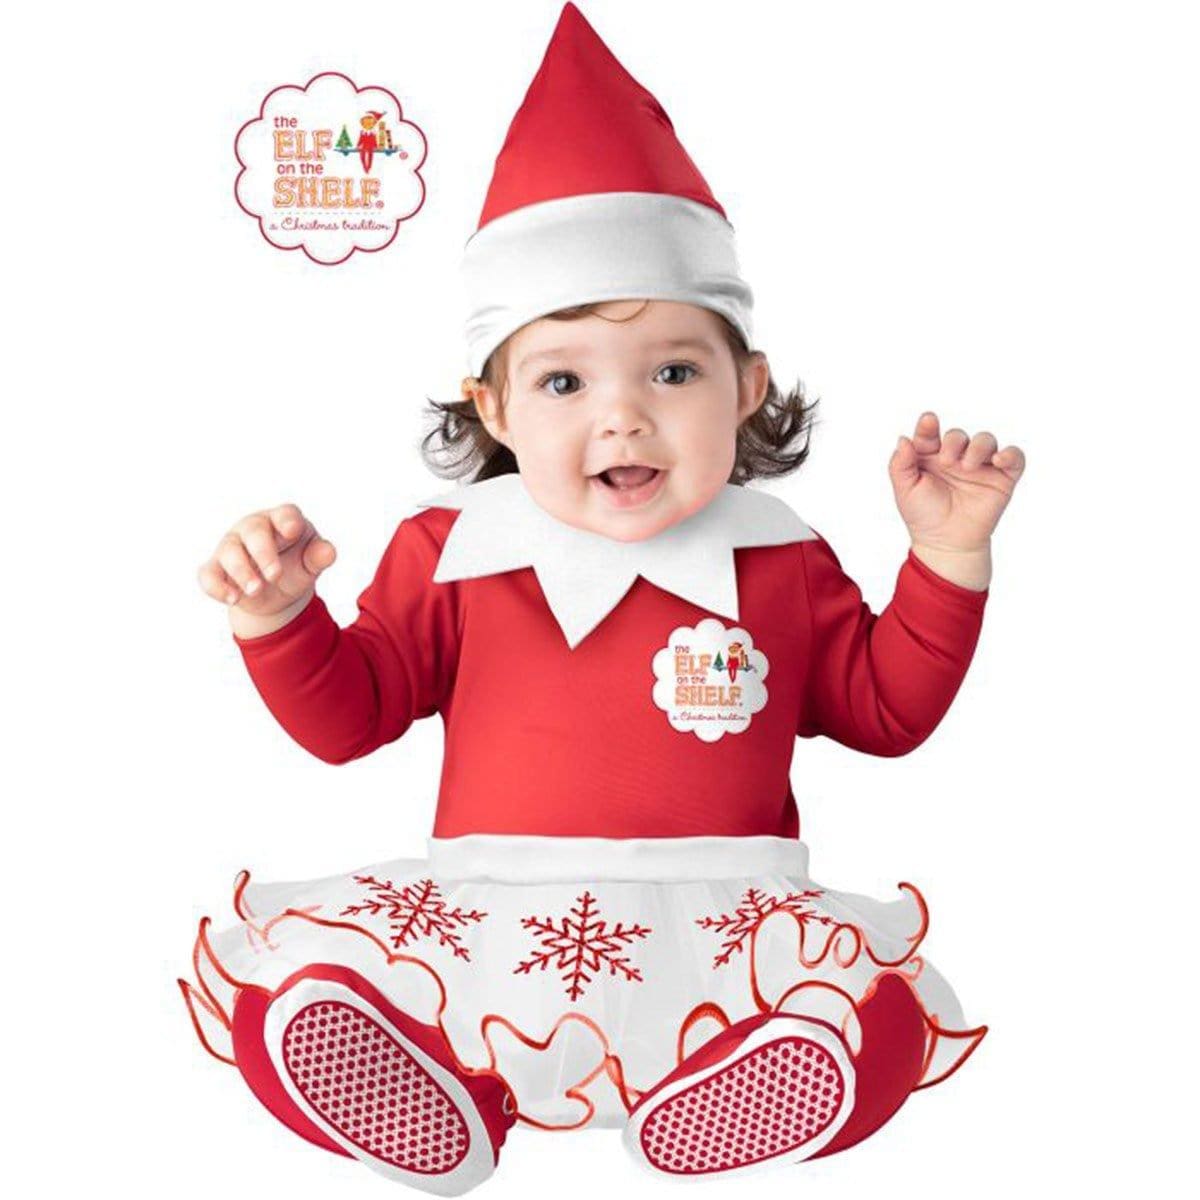 Buy Christmas Elf Dress for Toddlers, Elf On The Shelf: A Christmas Tradition sold at Party Expert